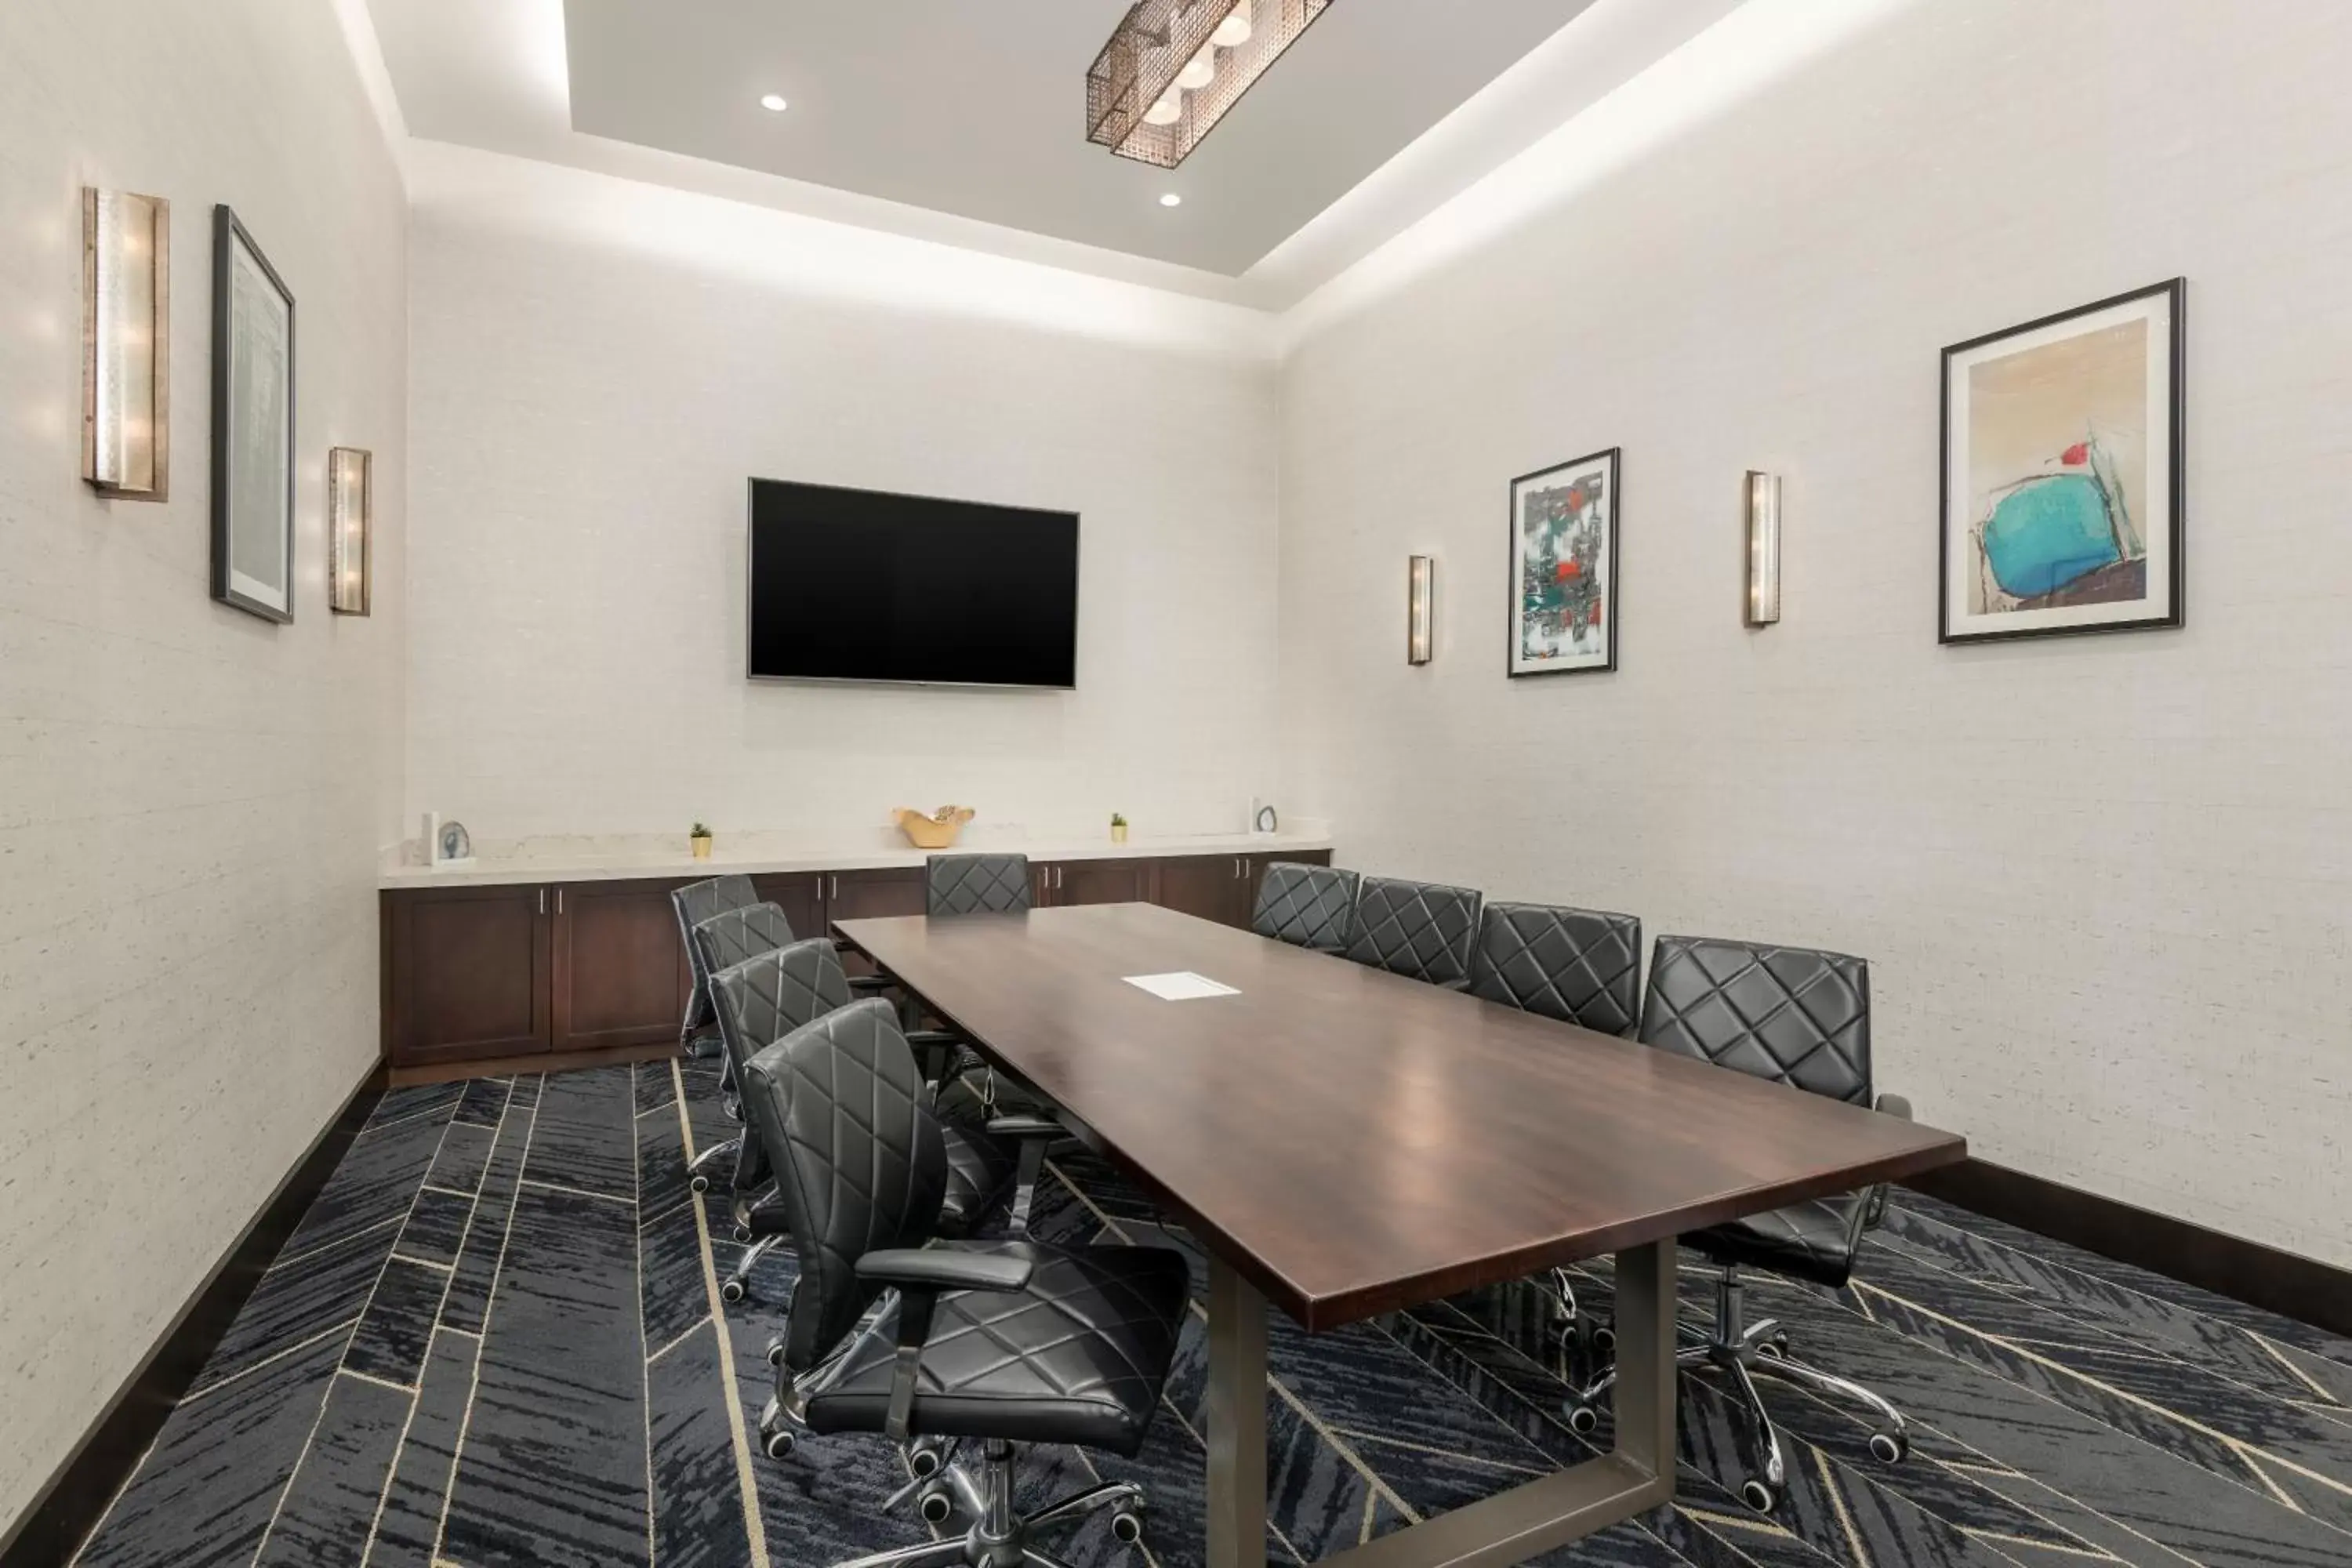 Meeting/conference room in Hyatt Place Greenville Downtown